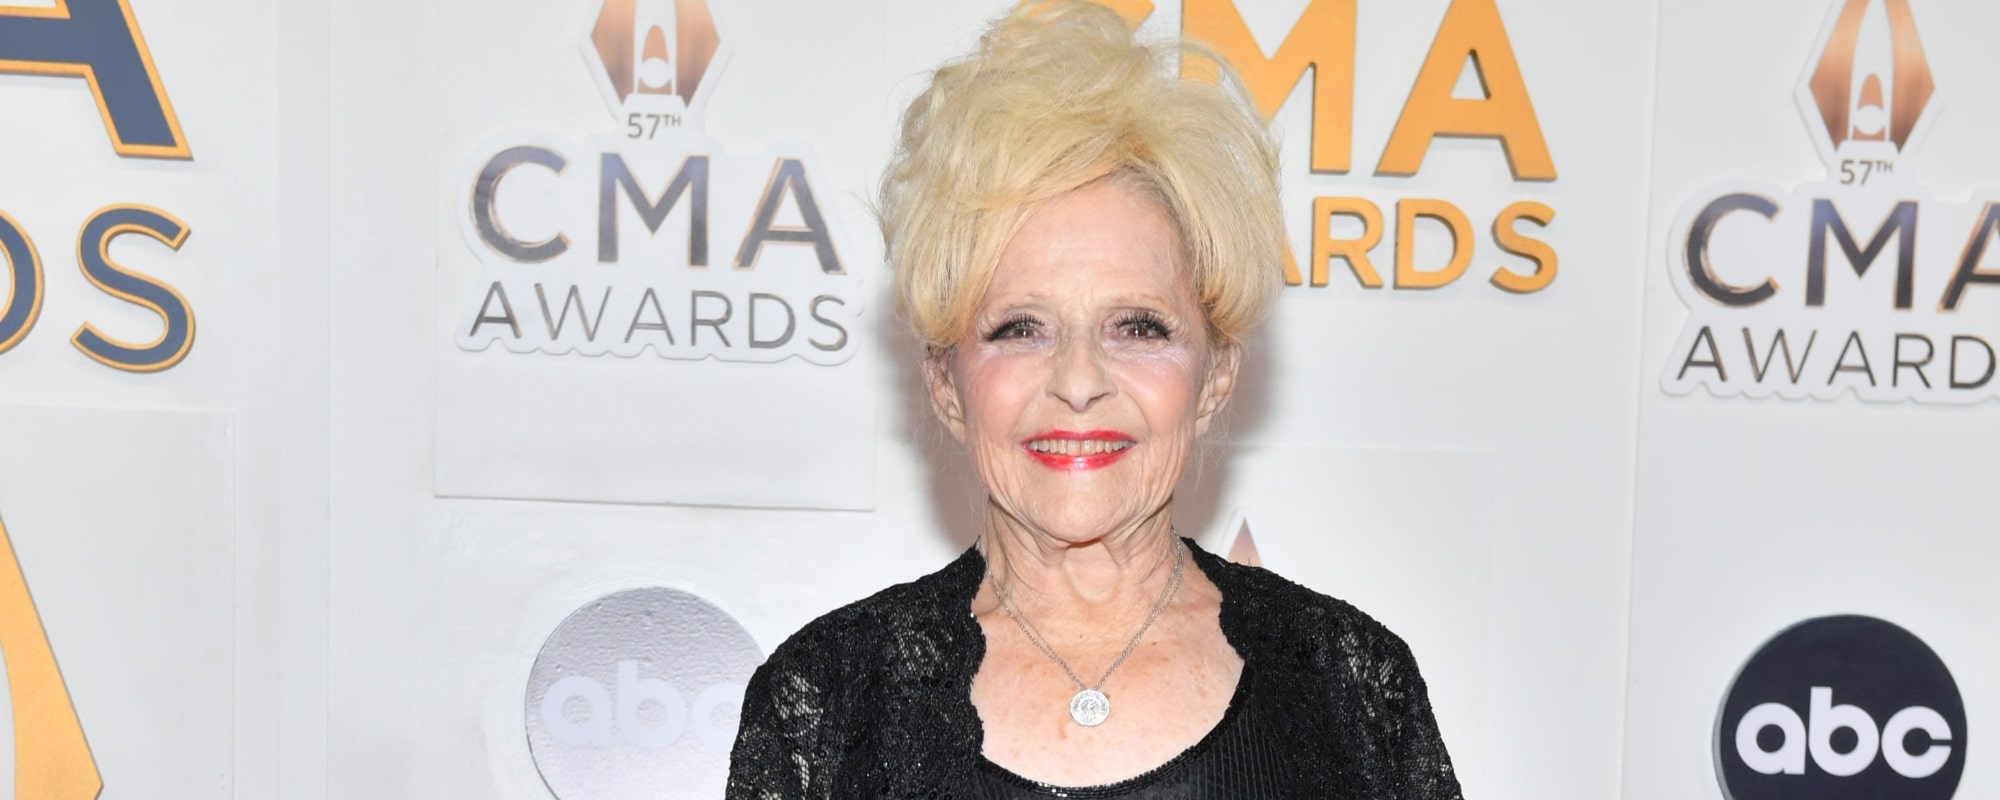 Brenda Lee Reflects on Her History-Making No. 1 Hit “Rockin’ Around the Christmas Tree”